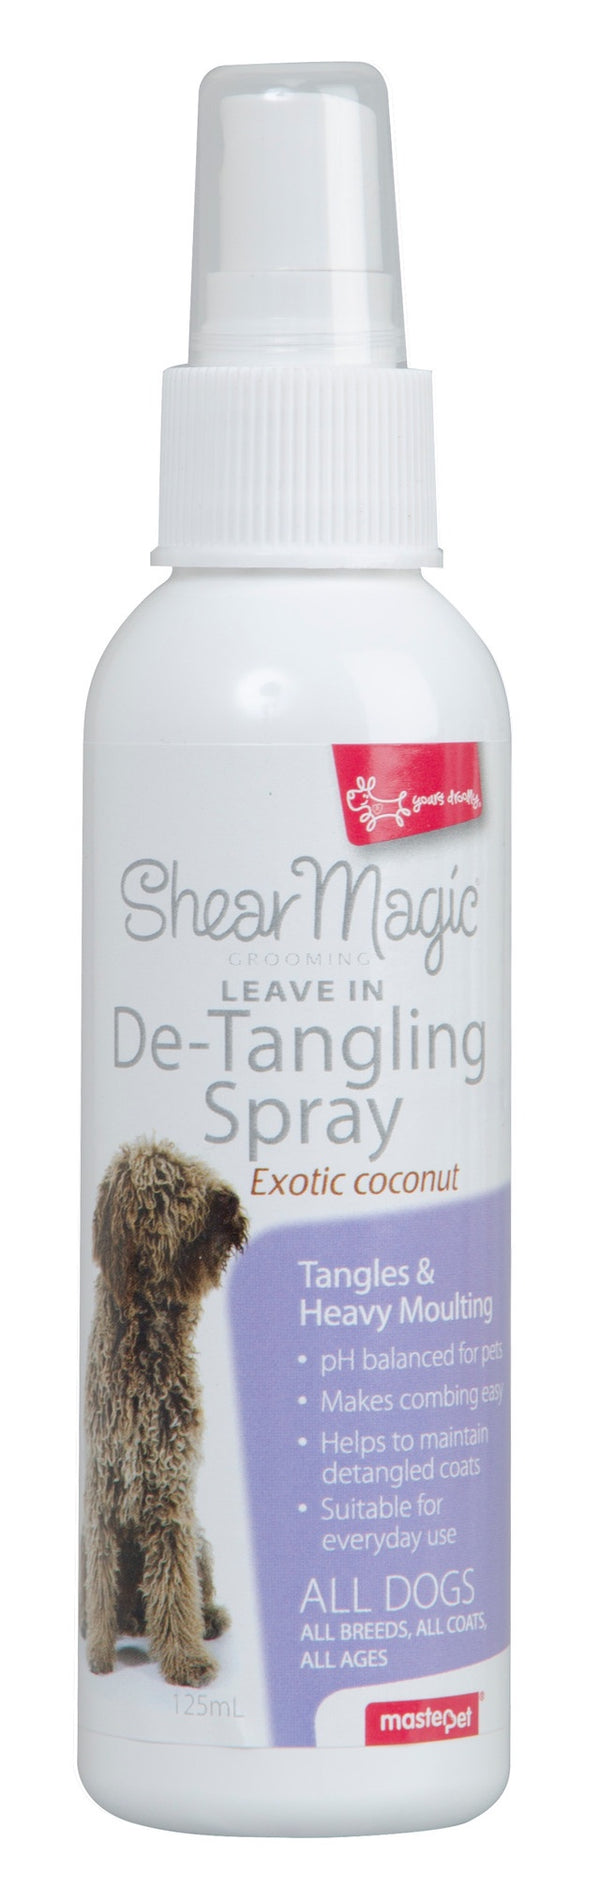 YOURS DROOLLY LEAVE-IN DE-TANGLING SPRAY